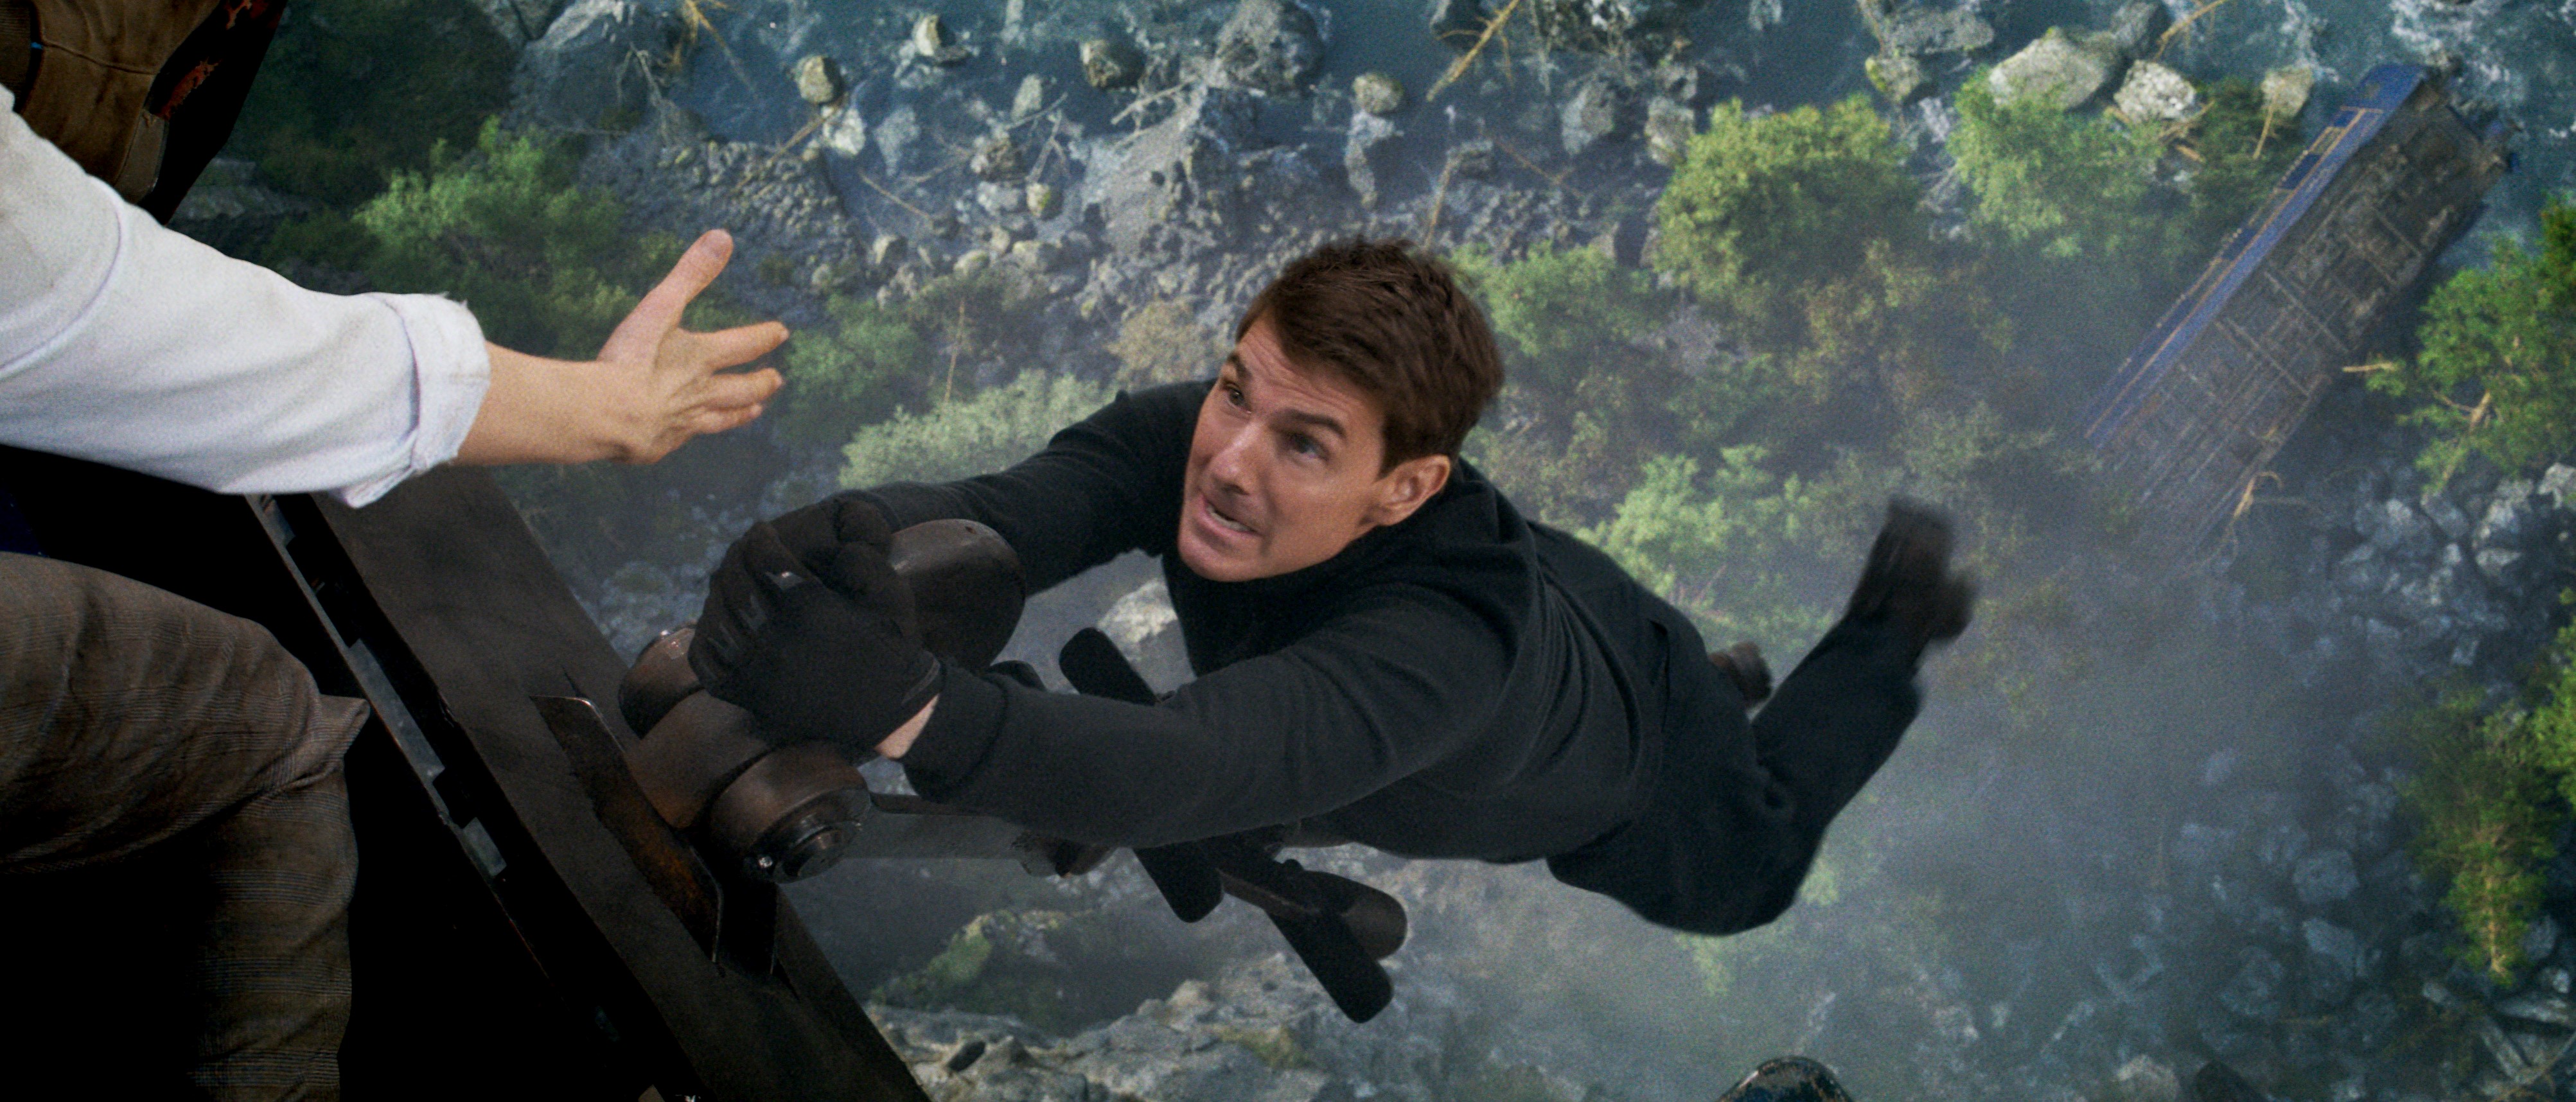 Tom Cruise is fiercely dedicated to his stunt work.